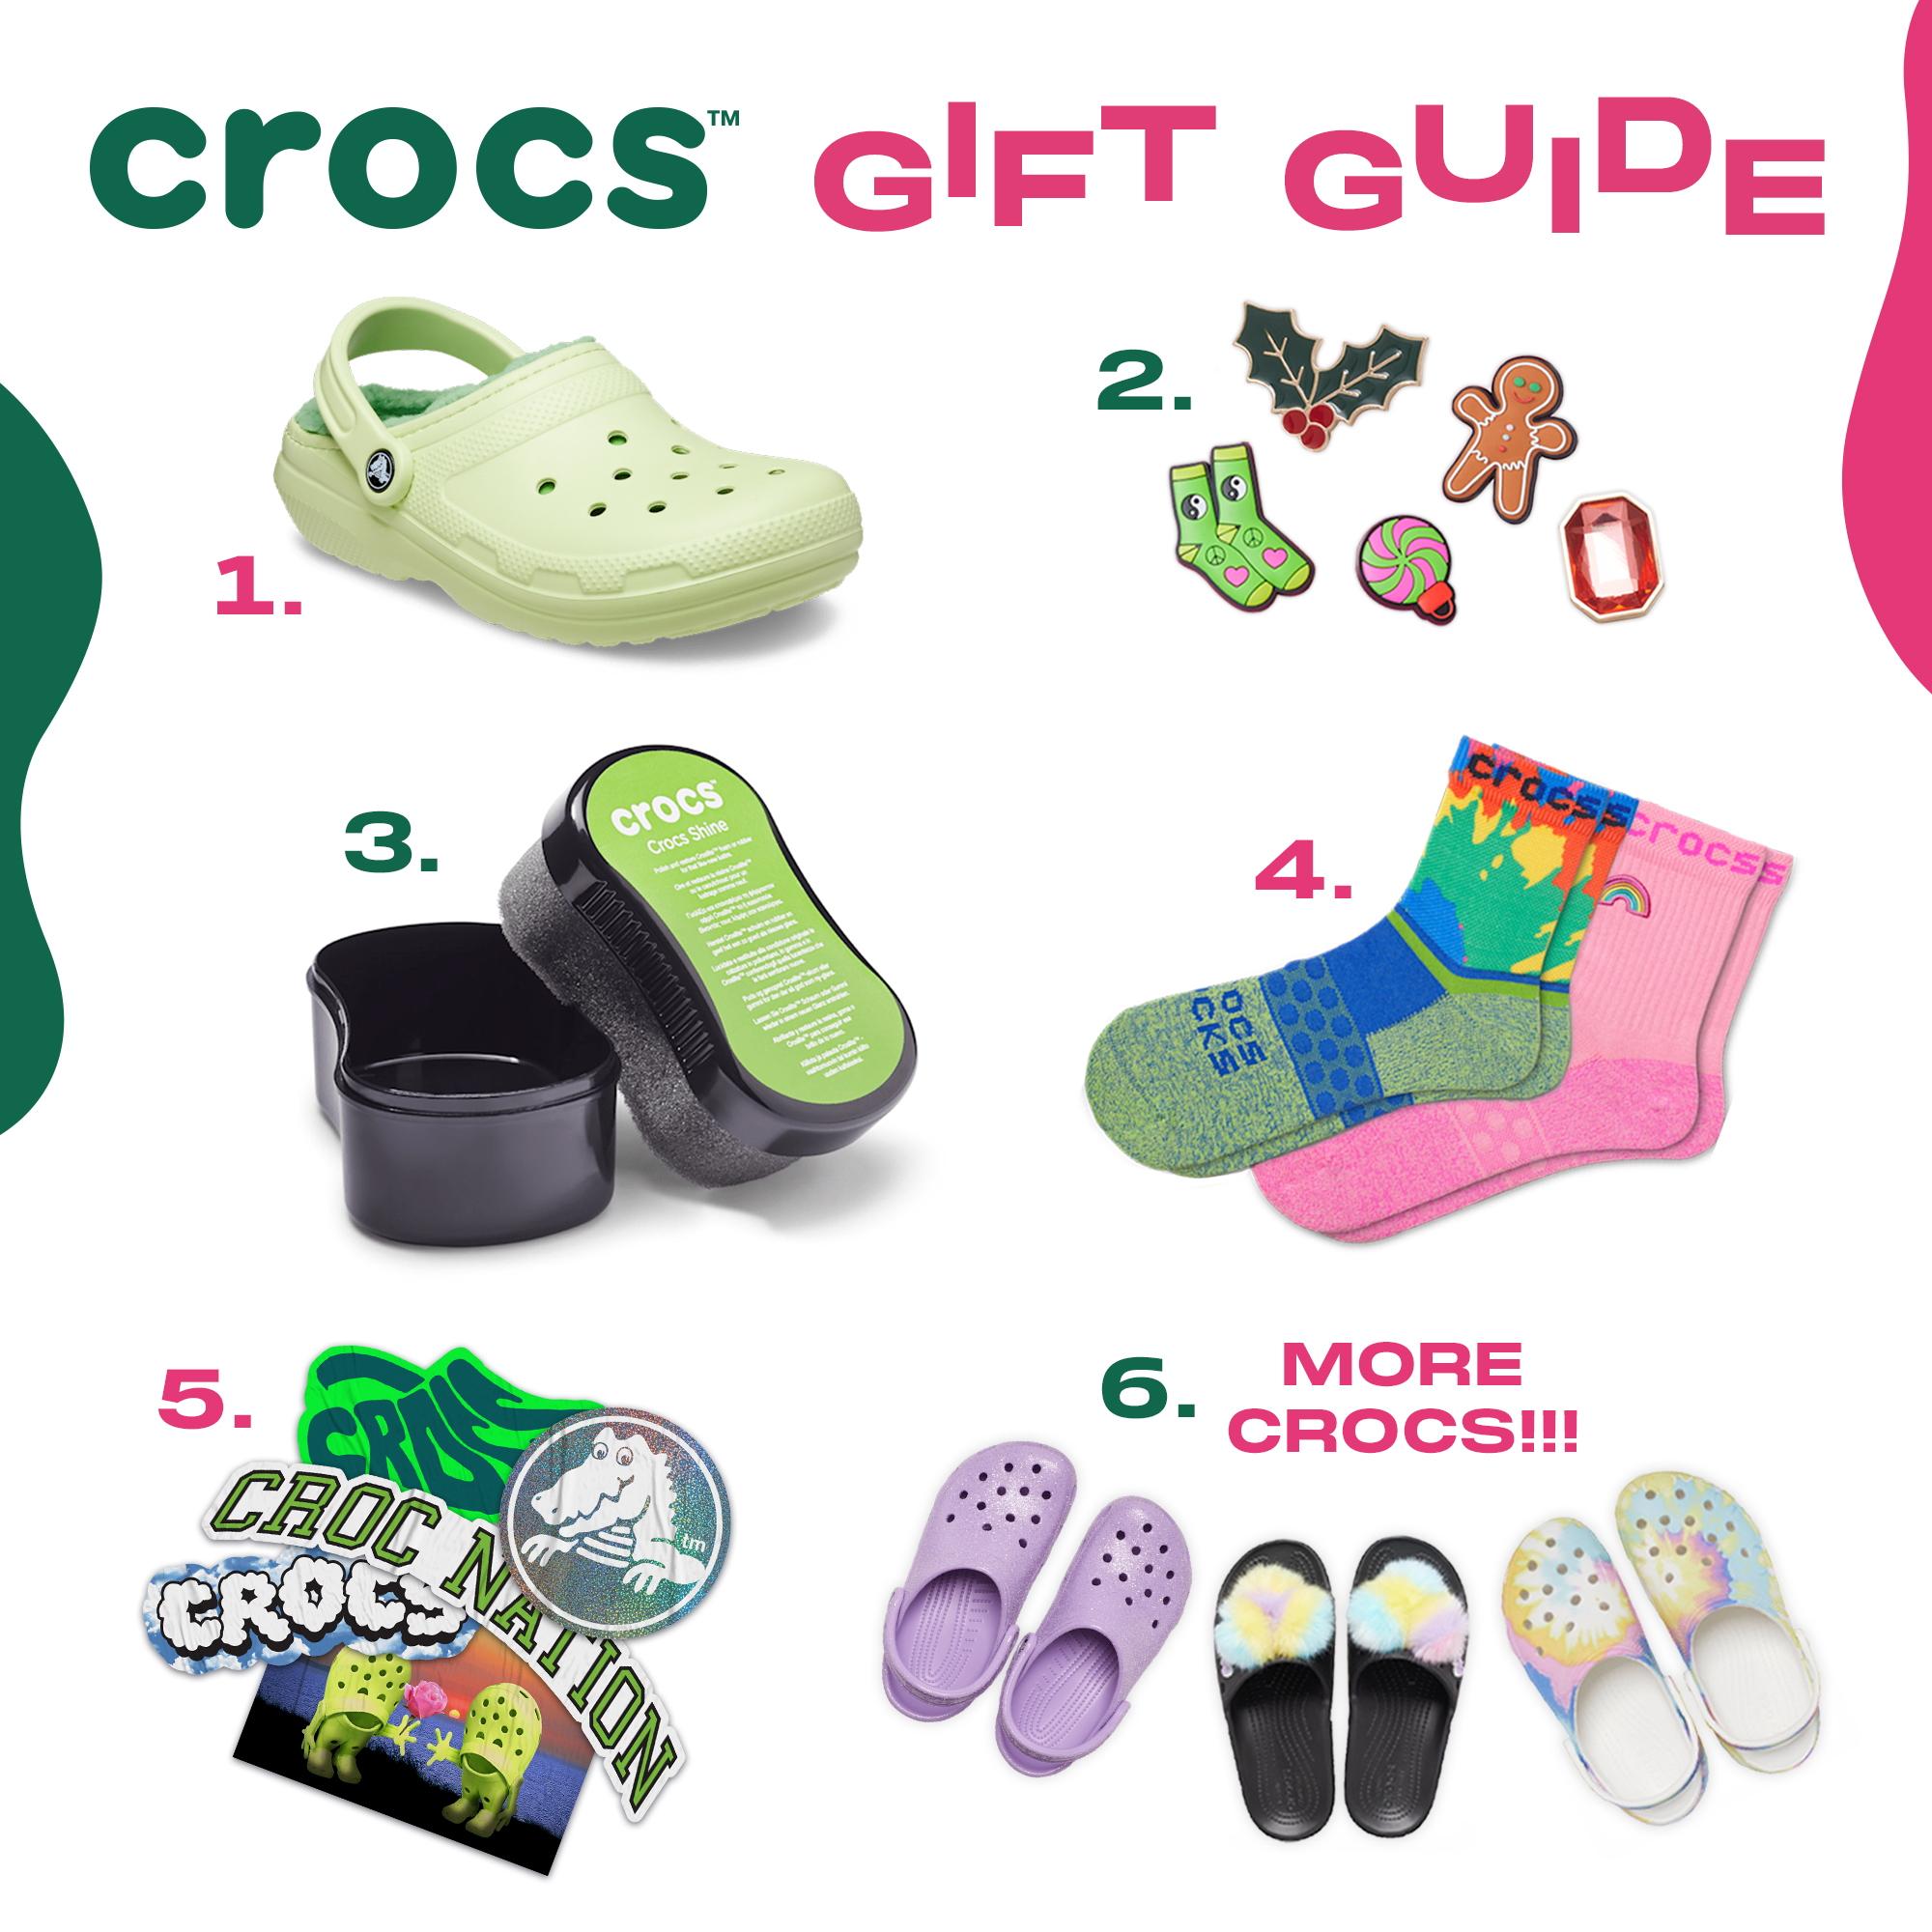 Crocs on X: Our guide to converting everyone into Croc lovers this  Christmas season! 🎁🎄 1. Cozy Crocs for home 2. Holiday Jibbitz 3. Crocs  Shine to keep 'em fresh! 4. Official